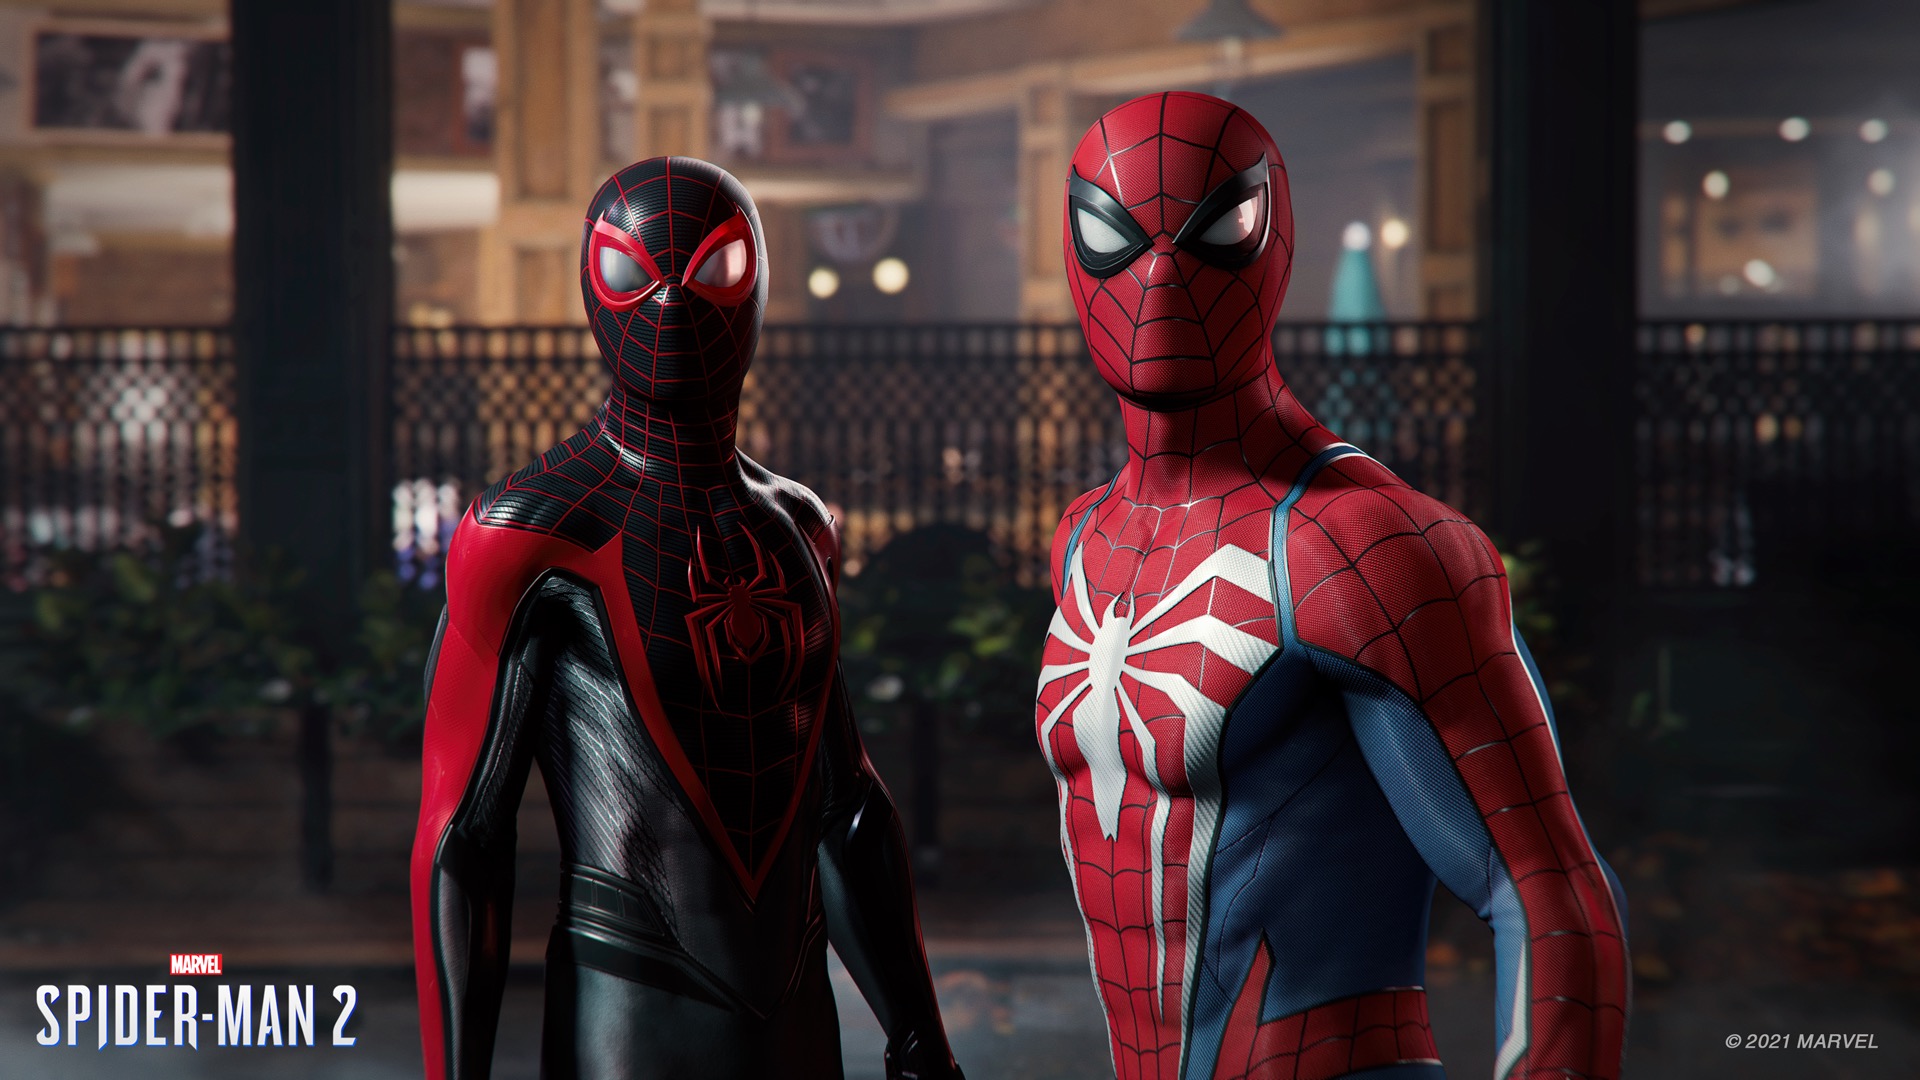 Miles Morales in his Spider-Man costume, and Peter Parker in his Spider-Man uniform, side-by-side.